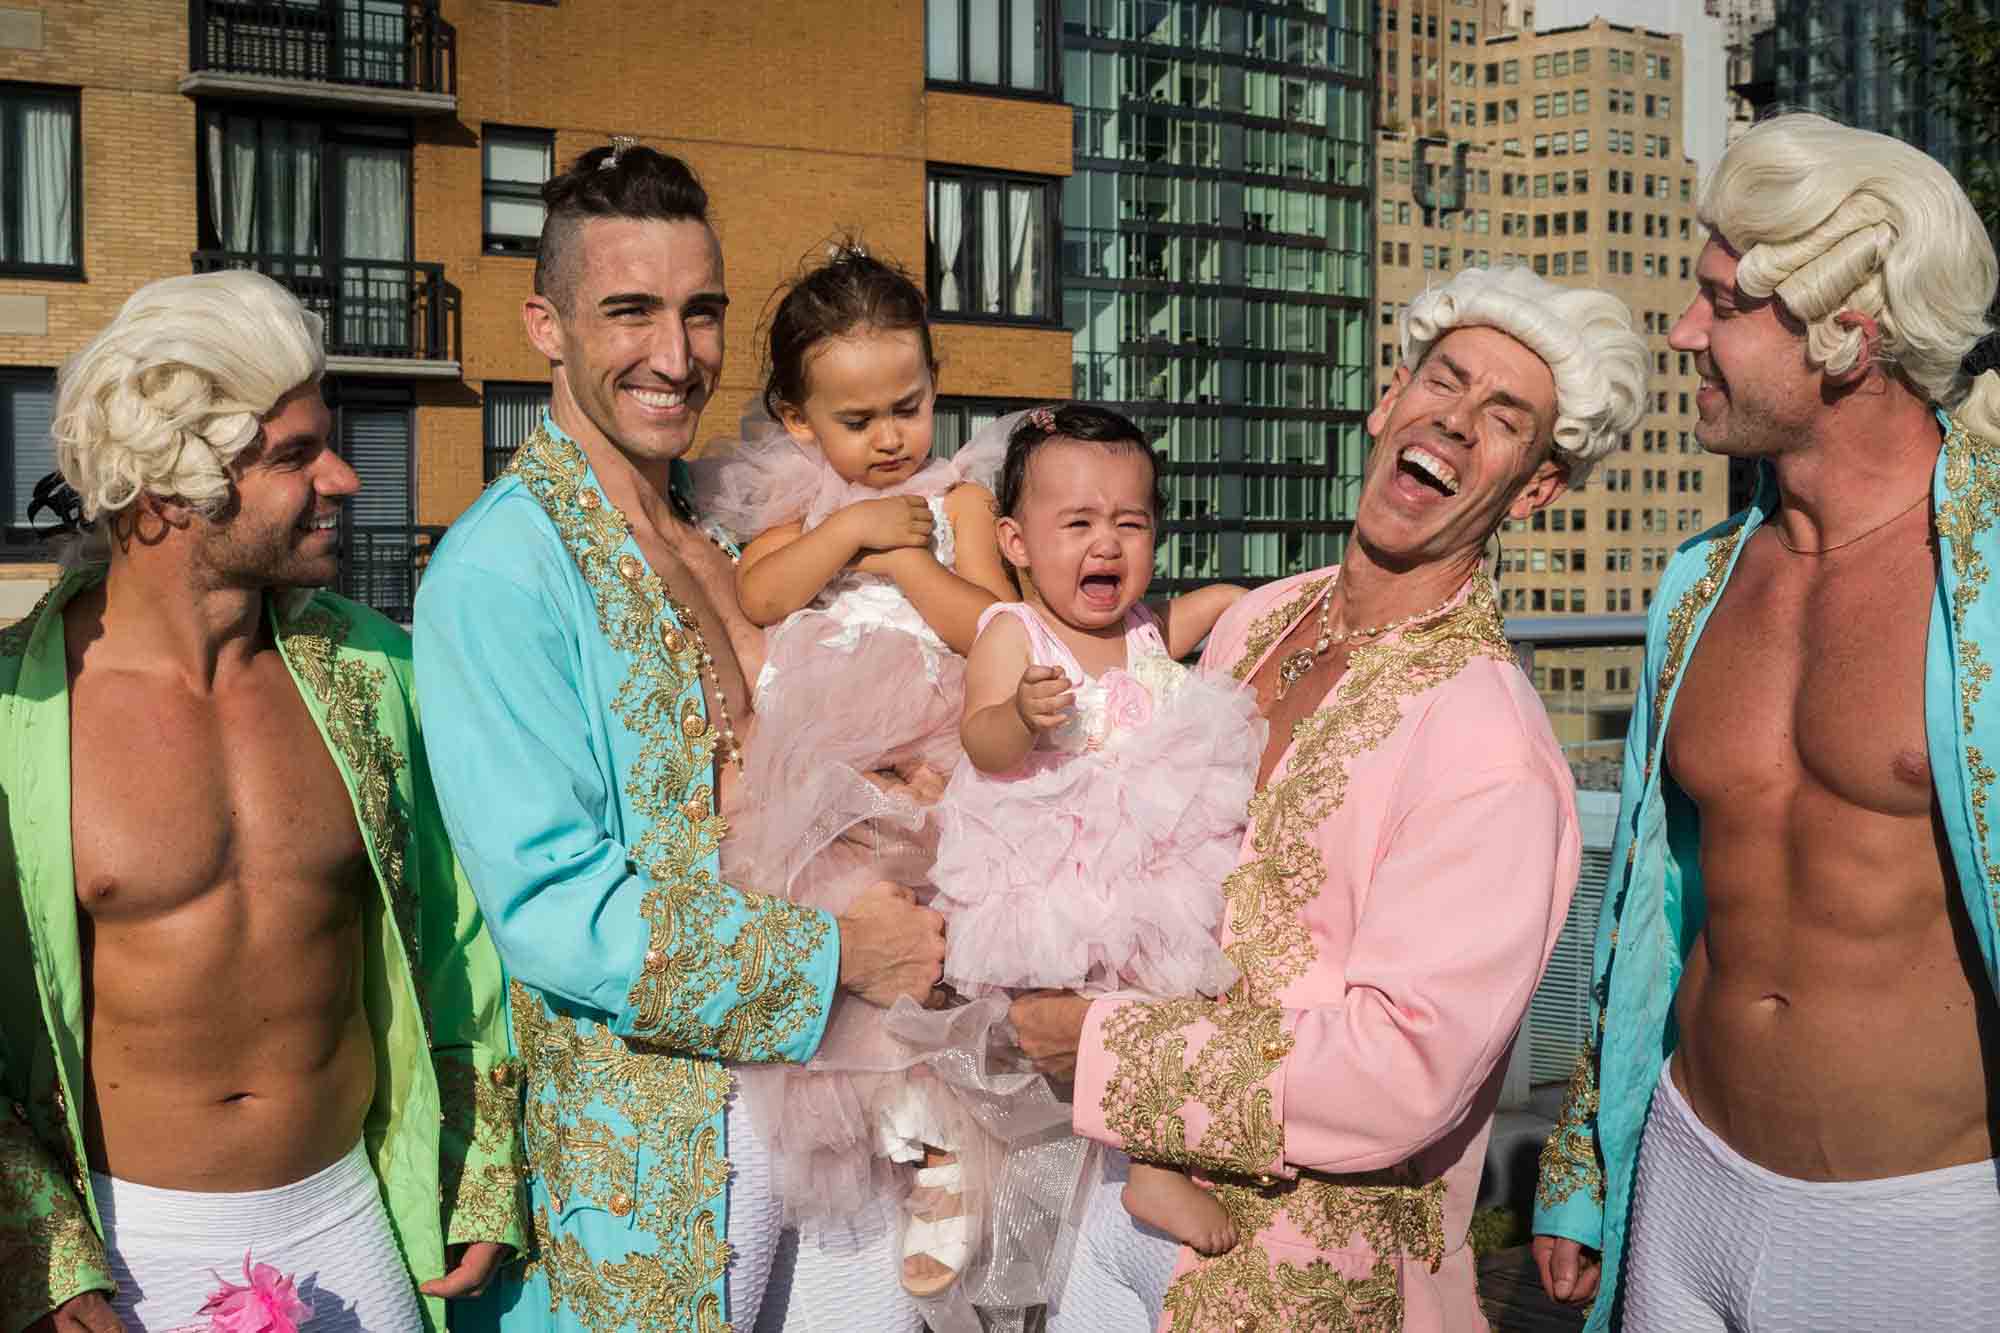 Two men smiling while holding two little girls dressed in pink dresses and crying for an article on event planning photography tips